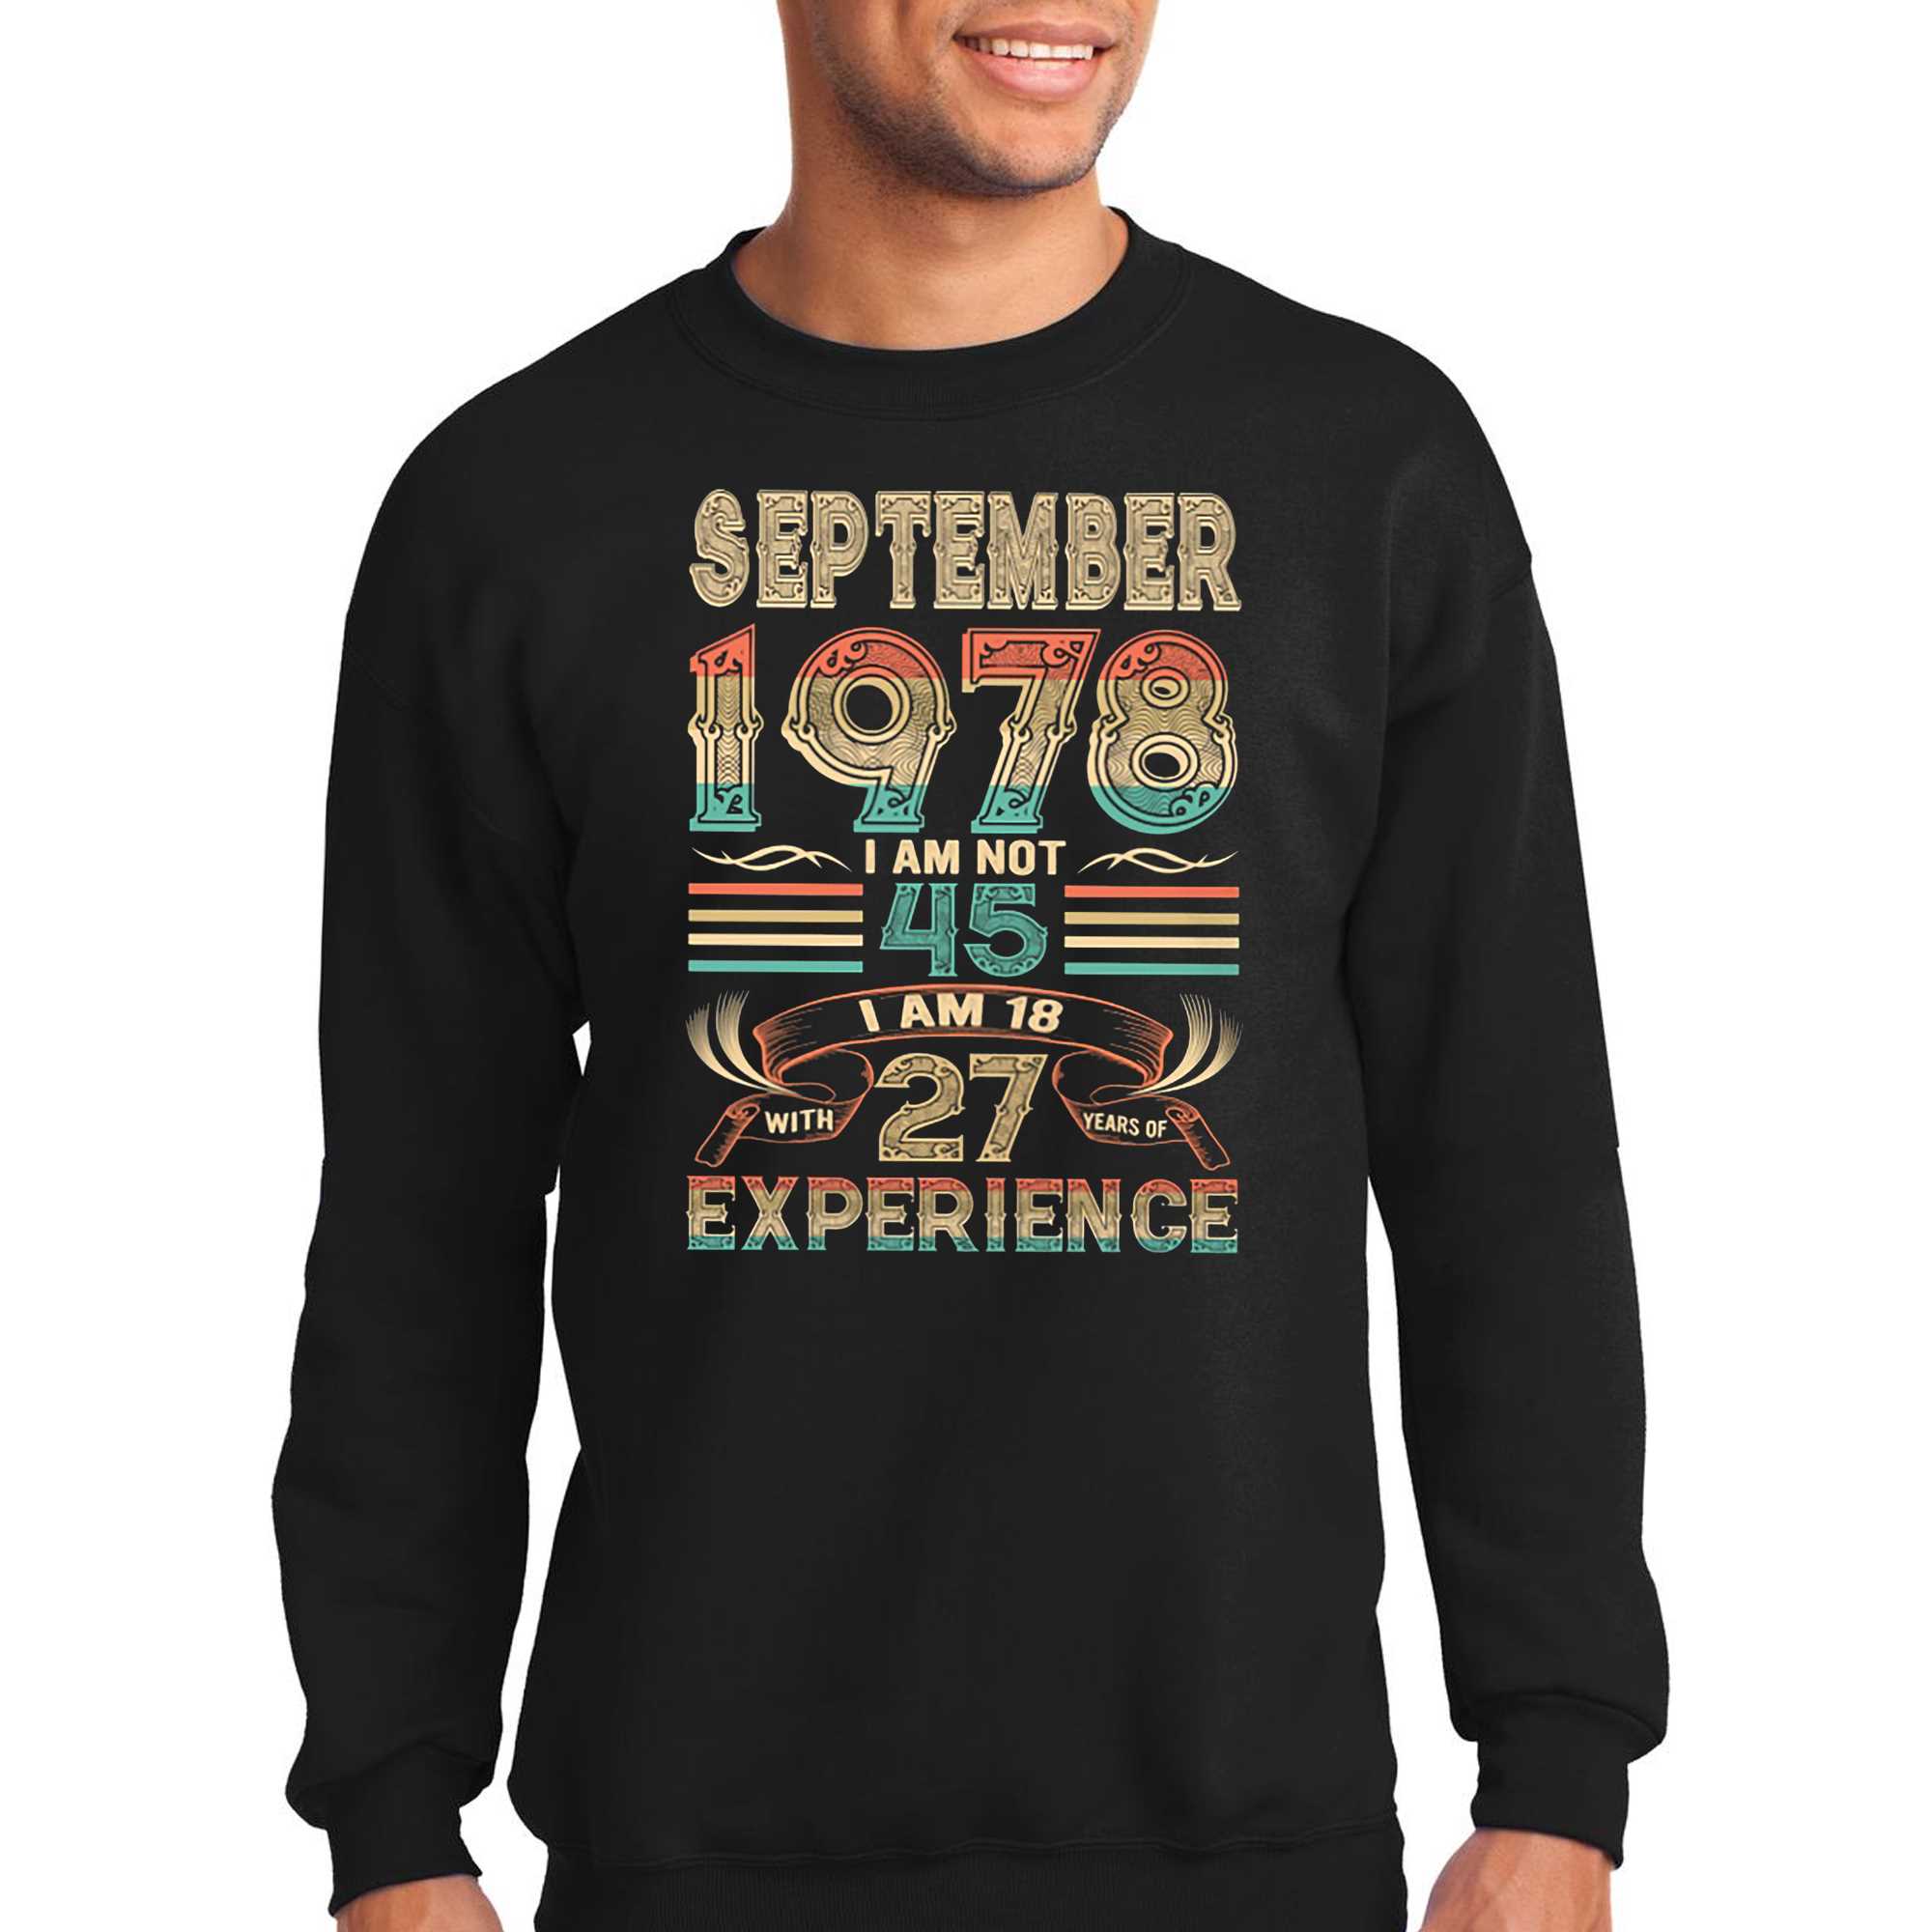 September 1978 I Am Not 45 I Am 18 With 27 Years Of Experience Shirt 